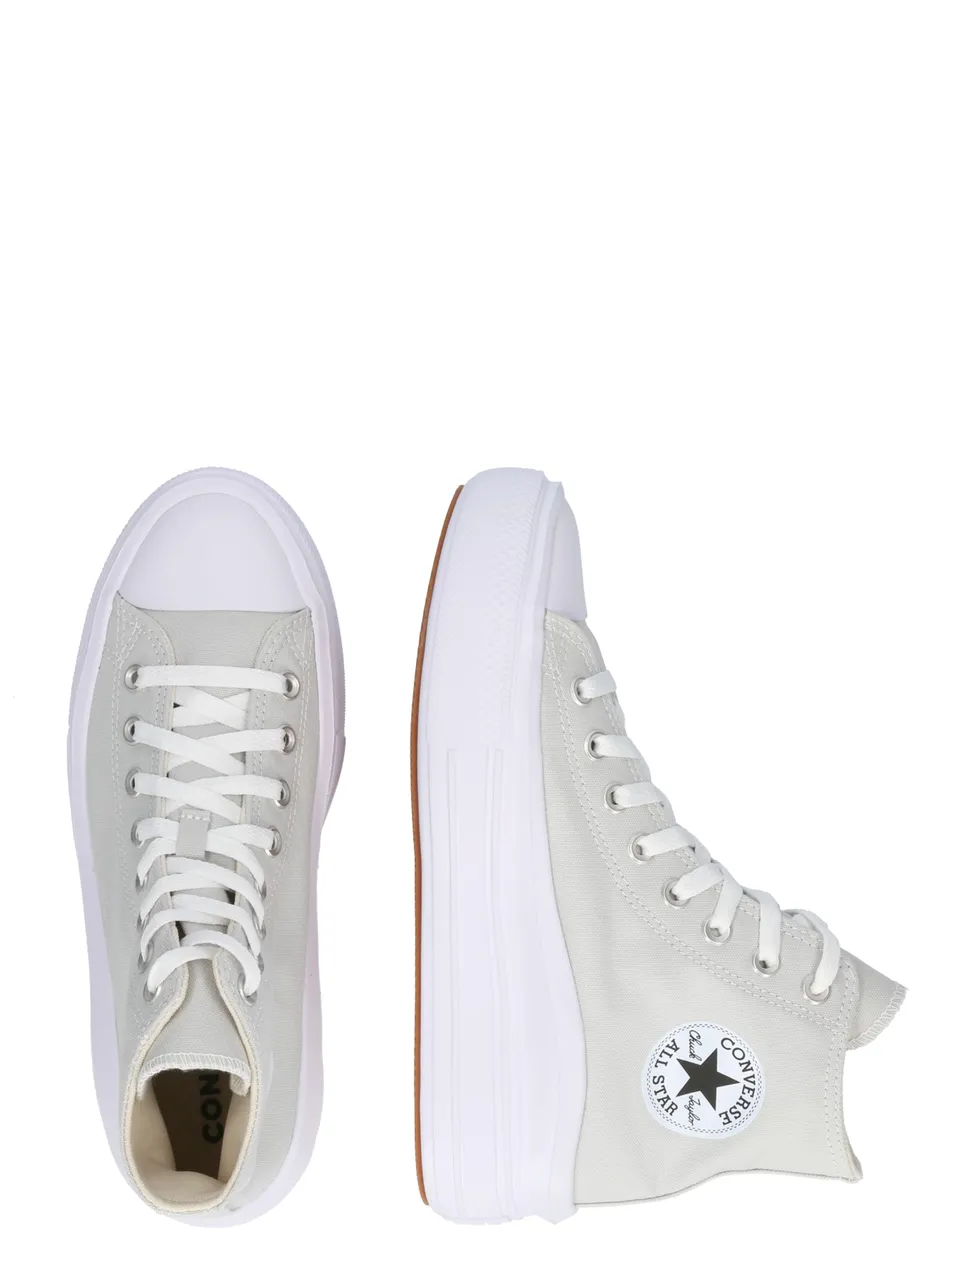 Sneakers hoog 'Chuck Taylor All Star Move'